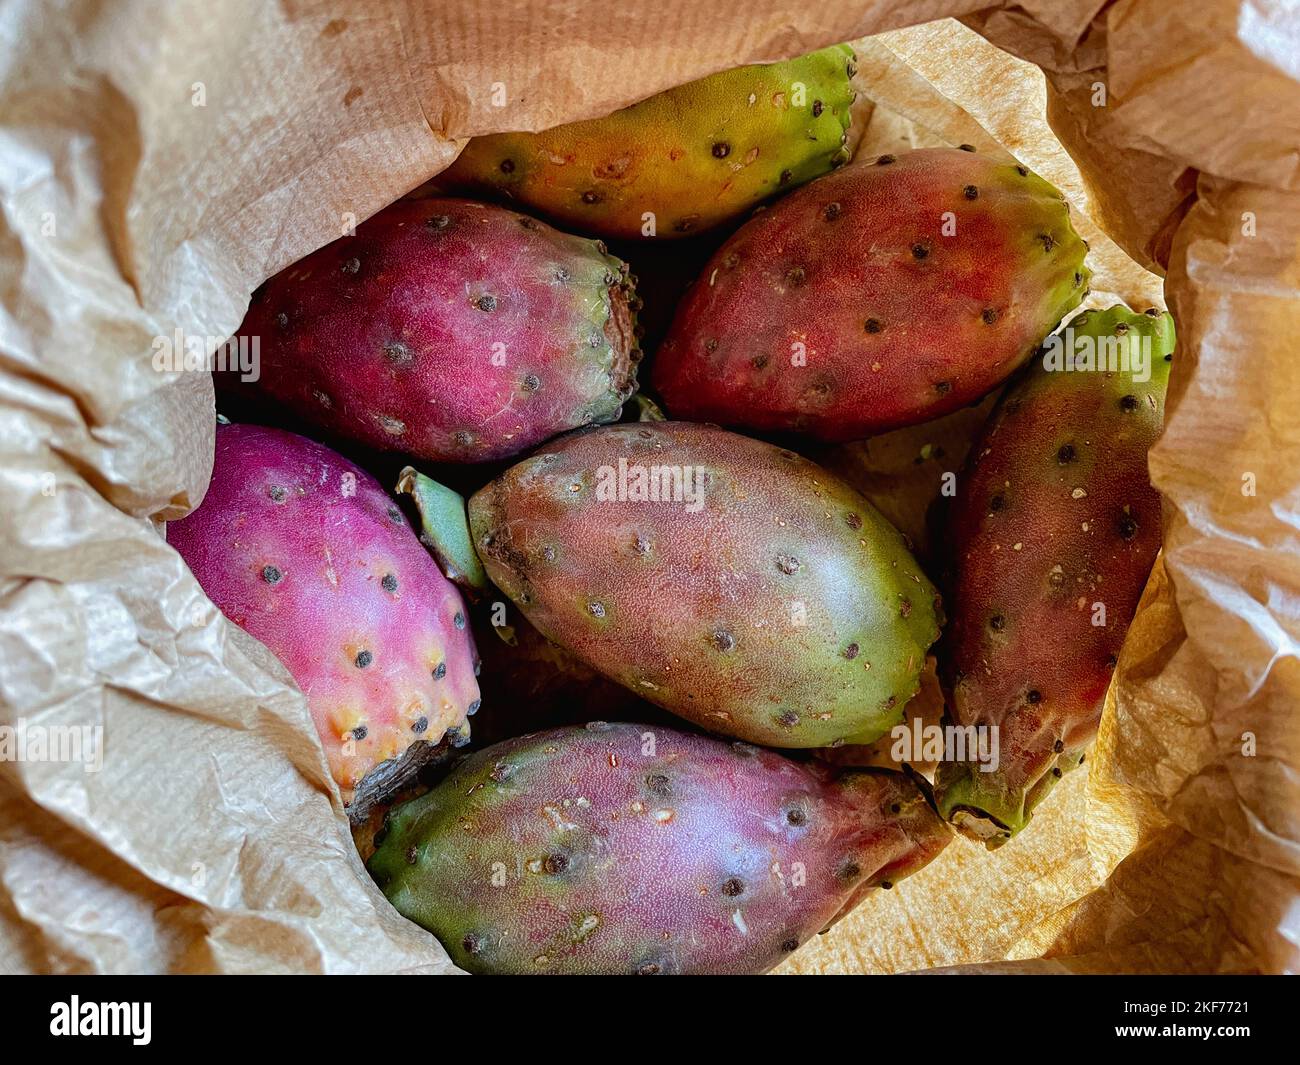 Prickly pear cactus colorful fresh ripe whole and cut fruits in brown paper bag. Stock Photo